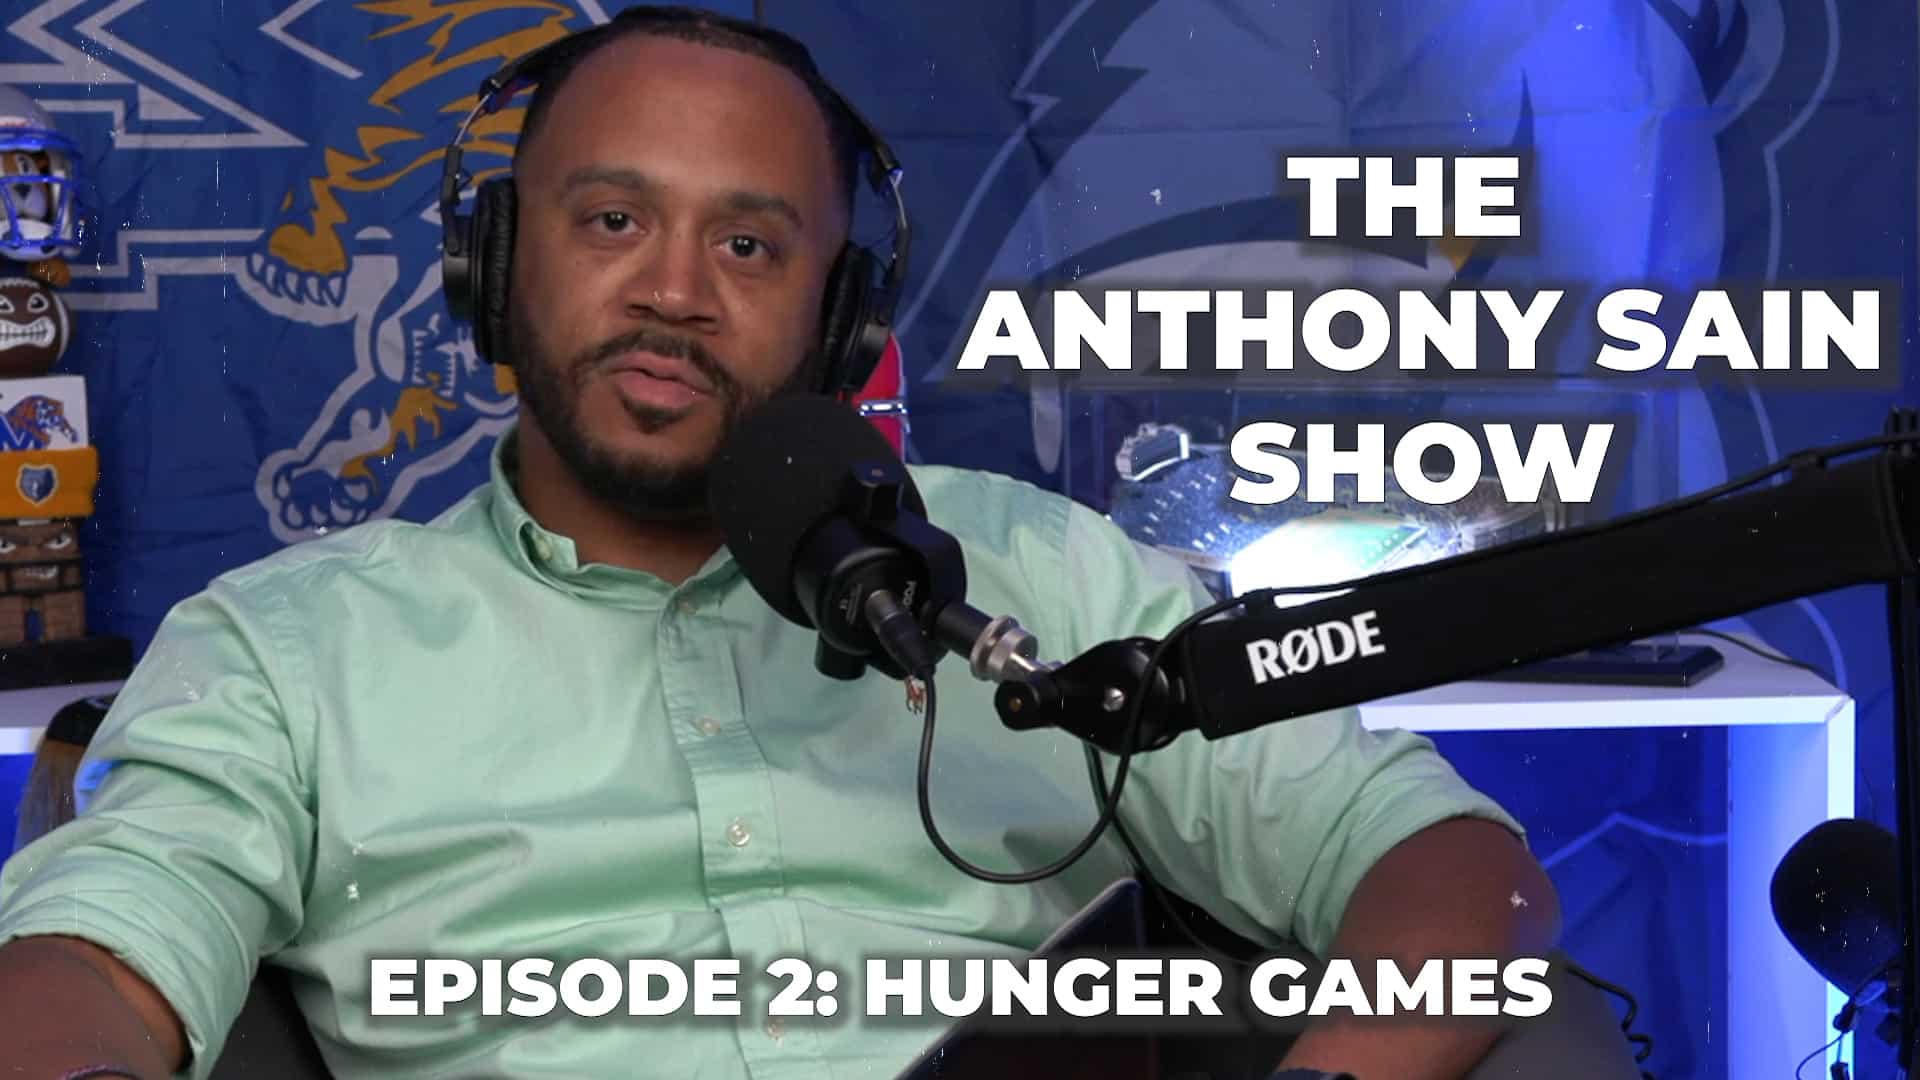 Featured image for “The Anthony Sain Show Ep 2: Hunger Games”